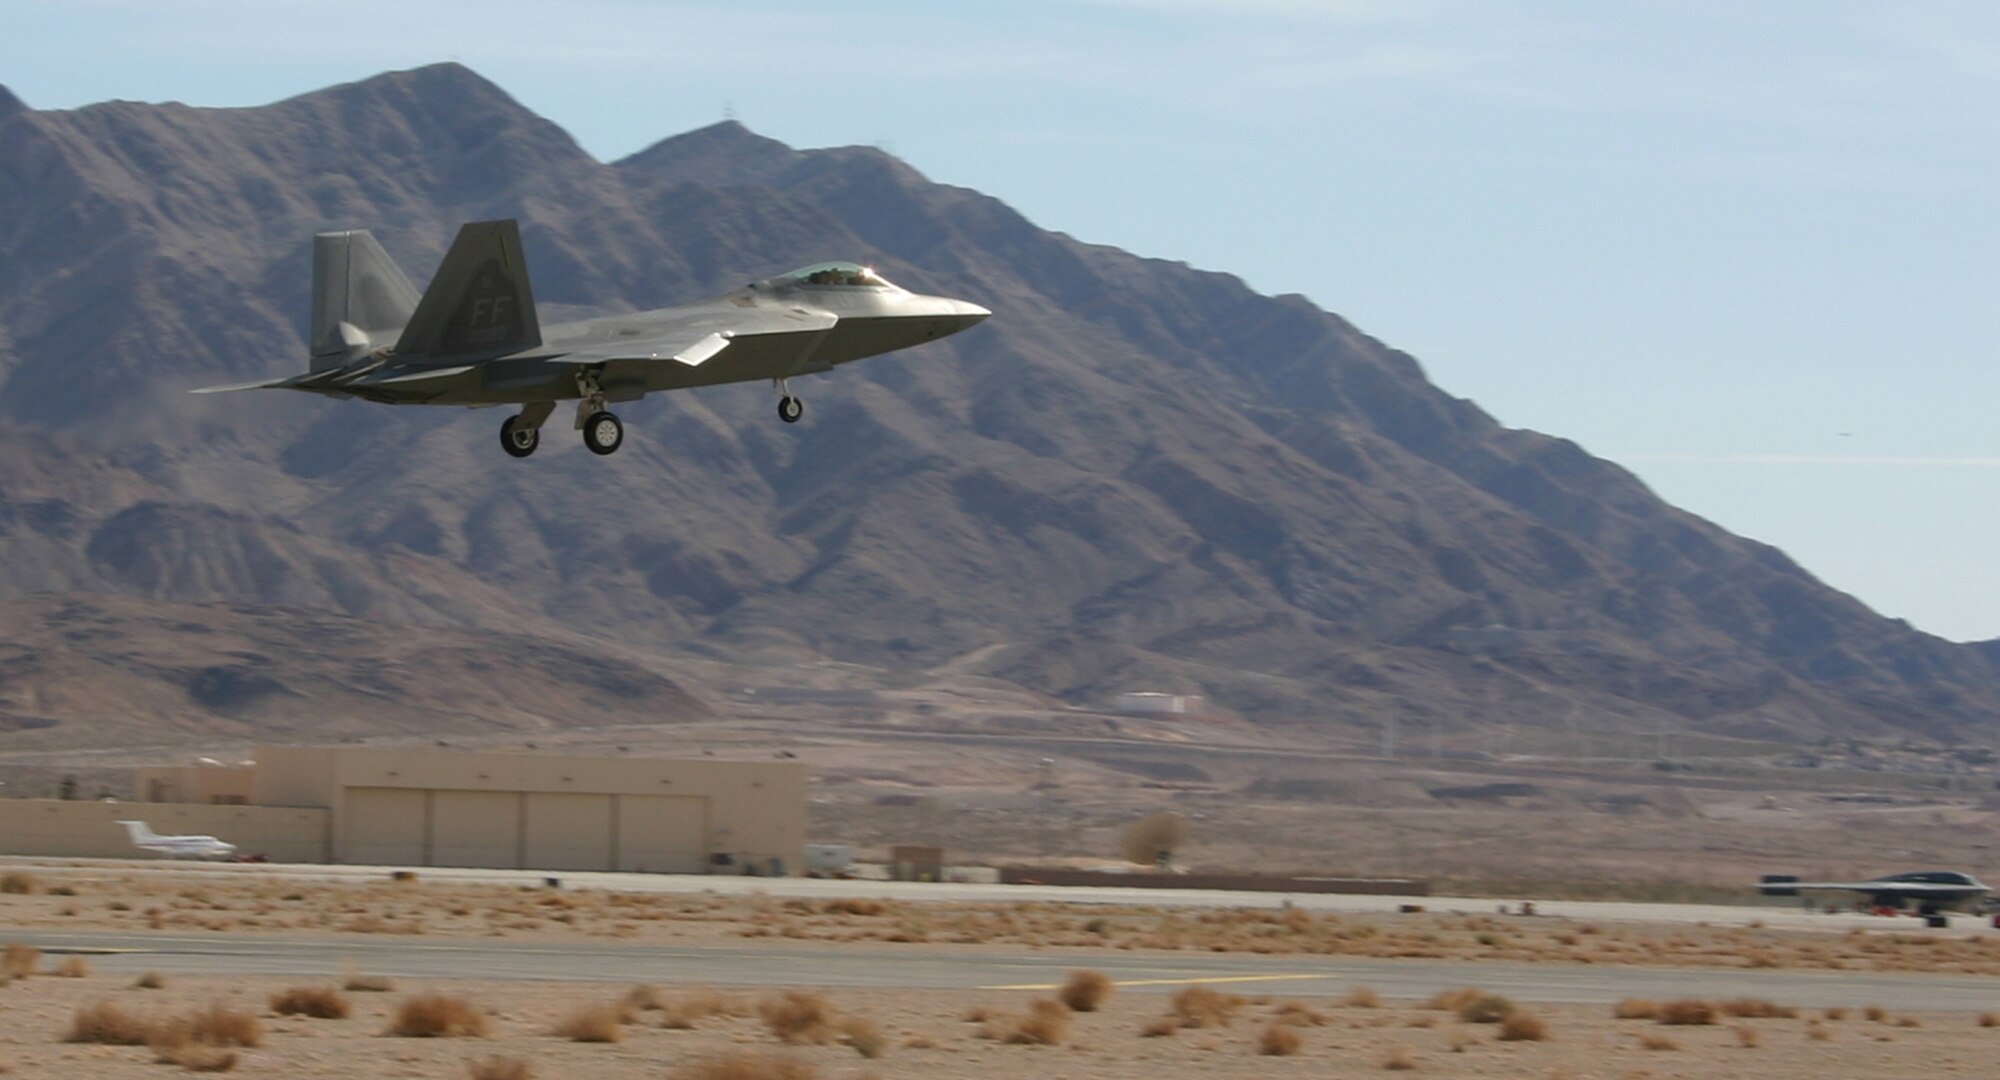 An F-22 Raptor from the 1st Fighter Wing, Langley Air Force Base, Va., lands at Nellis after a Red Flag mission Feb. 12, 2007. The F-22s are making their first appearance in Red Flag, along with veteran stealth aircraft F-117 Nighthawk fighters and B-2 Spirit bombers. Red Flag sharpens aircrews’ war-fighting skills in realistic combat situations. Crews are flying missions during the day and night to the nearby Nevada Test and Training Range where they take part in highly realistic aerial combat. The U.S. Air Force and Navy, along with Australia and the United Kingdom, are participating in February's Red Flag.  (U.S. Air Force photo/Mike Estrada)